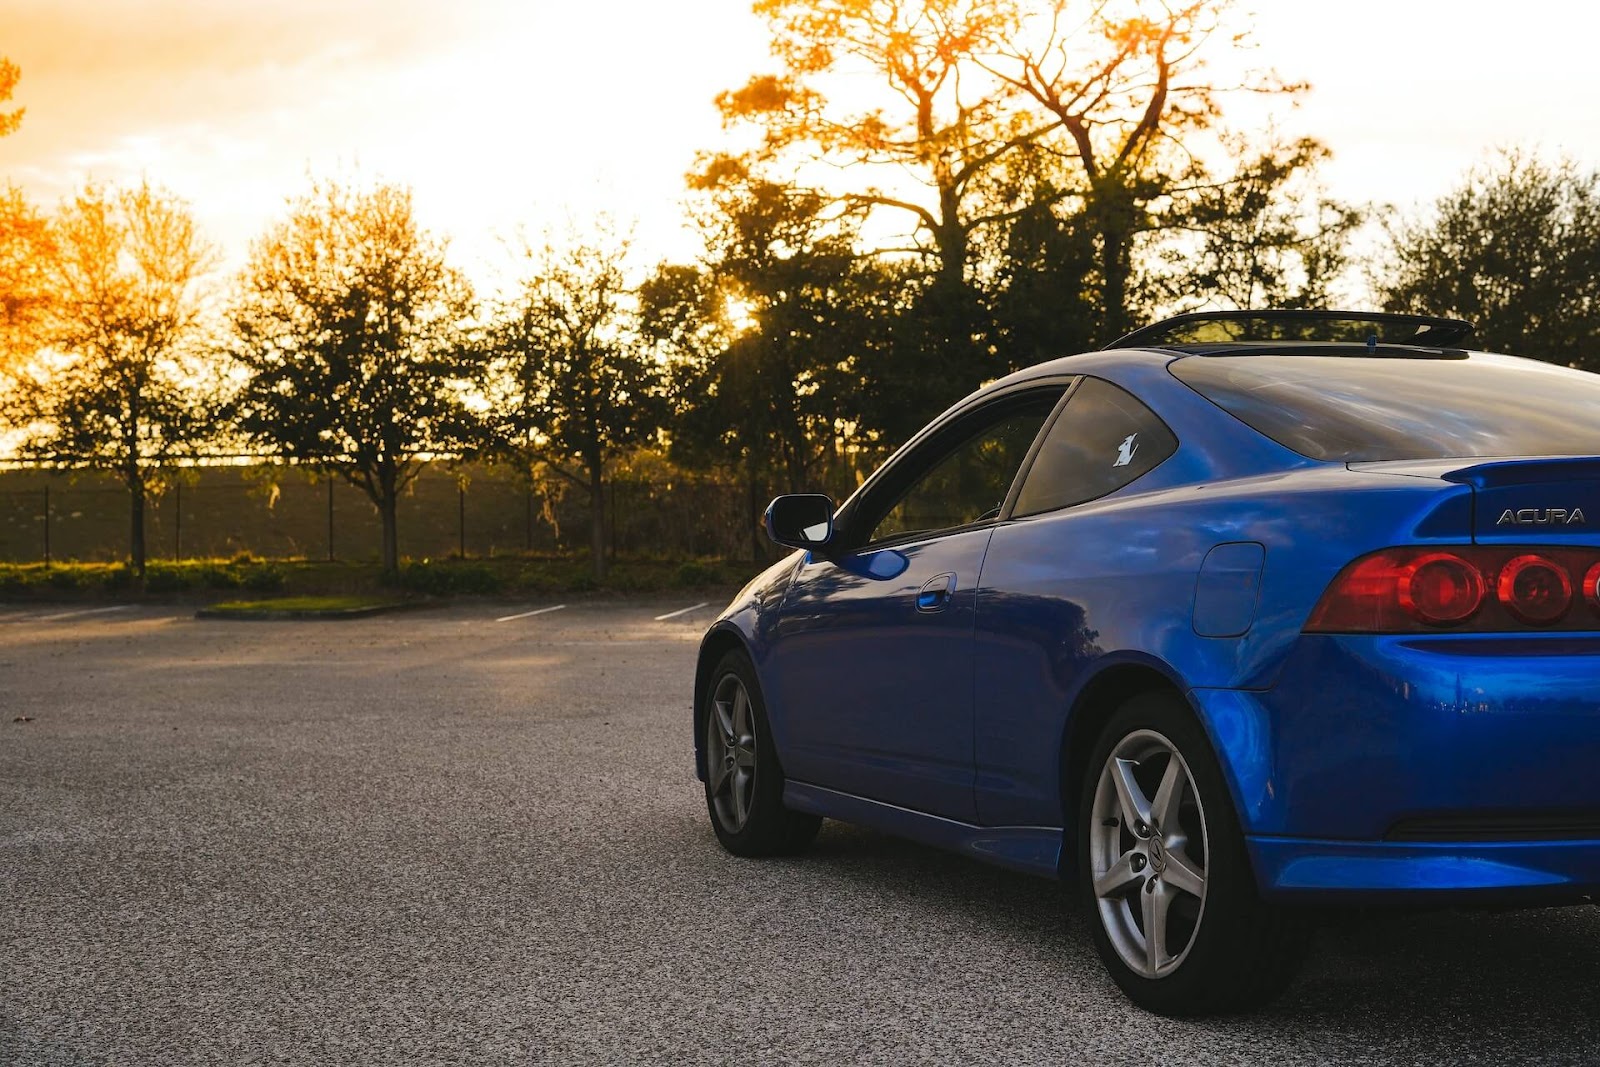 Blue Acura looks at the sunset.